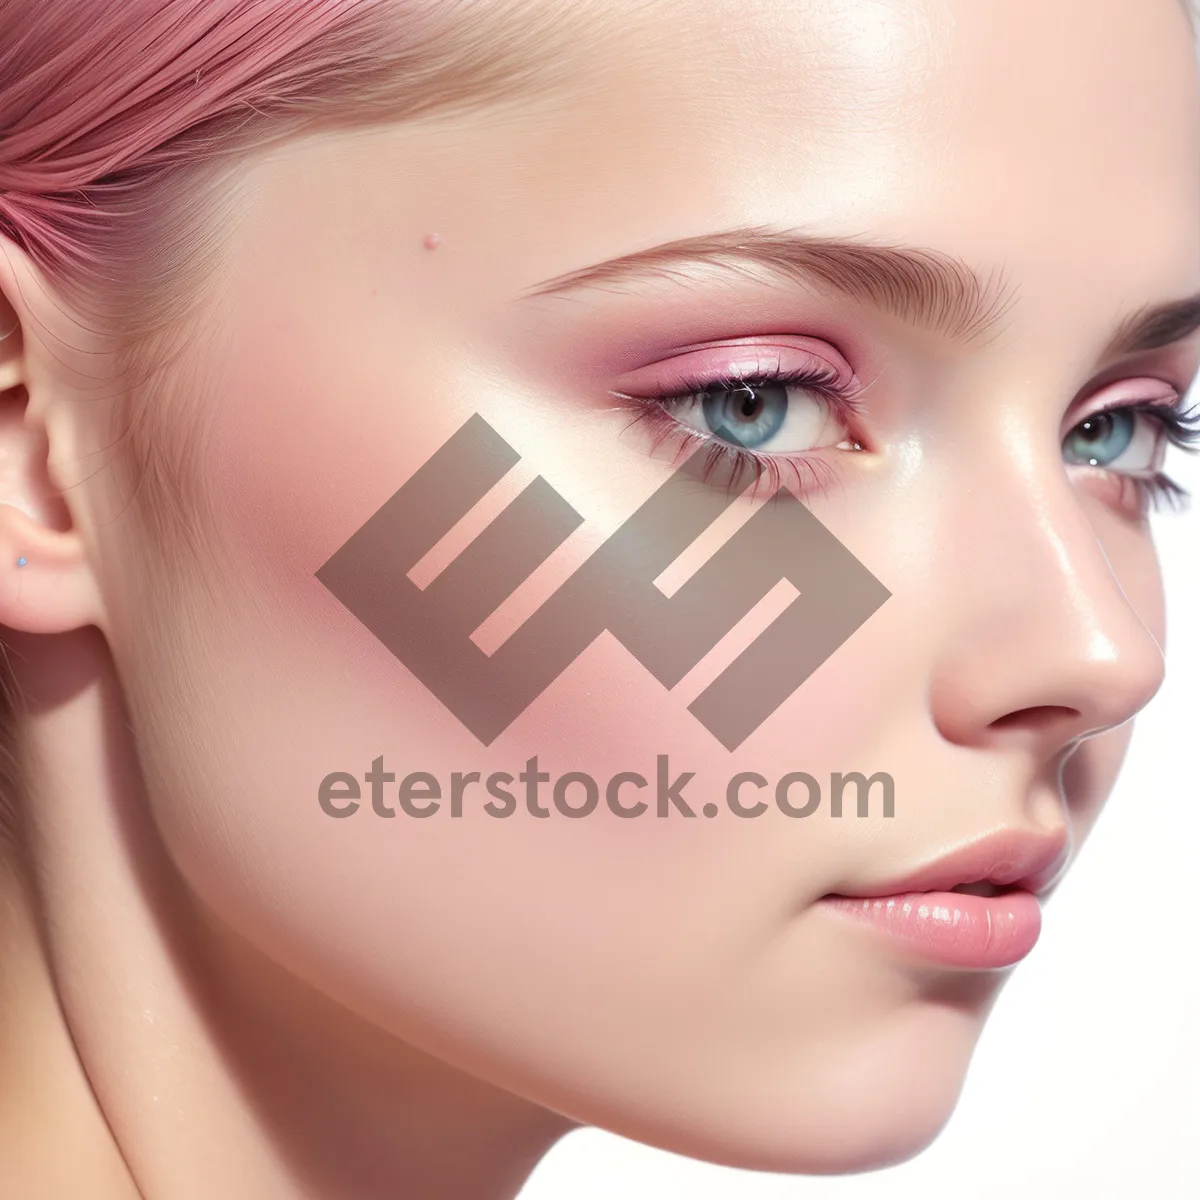 Picture of Fresh-Faced Beauty: Clean & Attractive Skincare Portrait